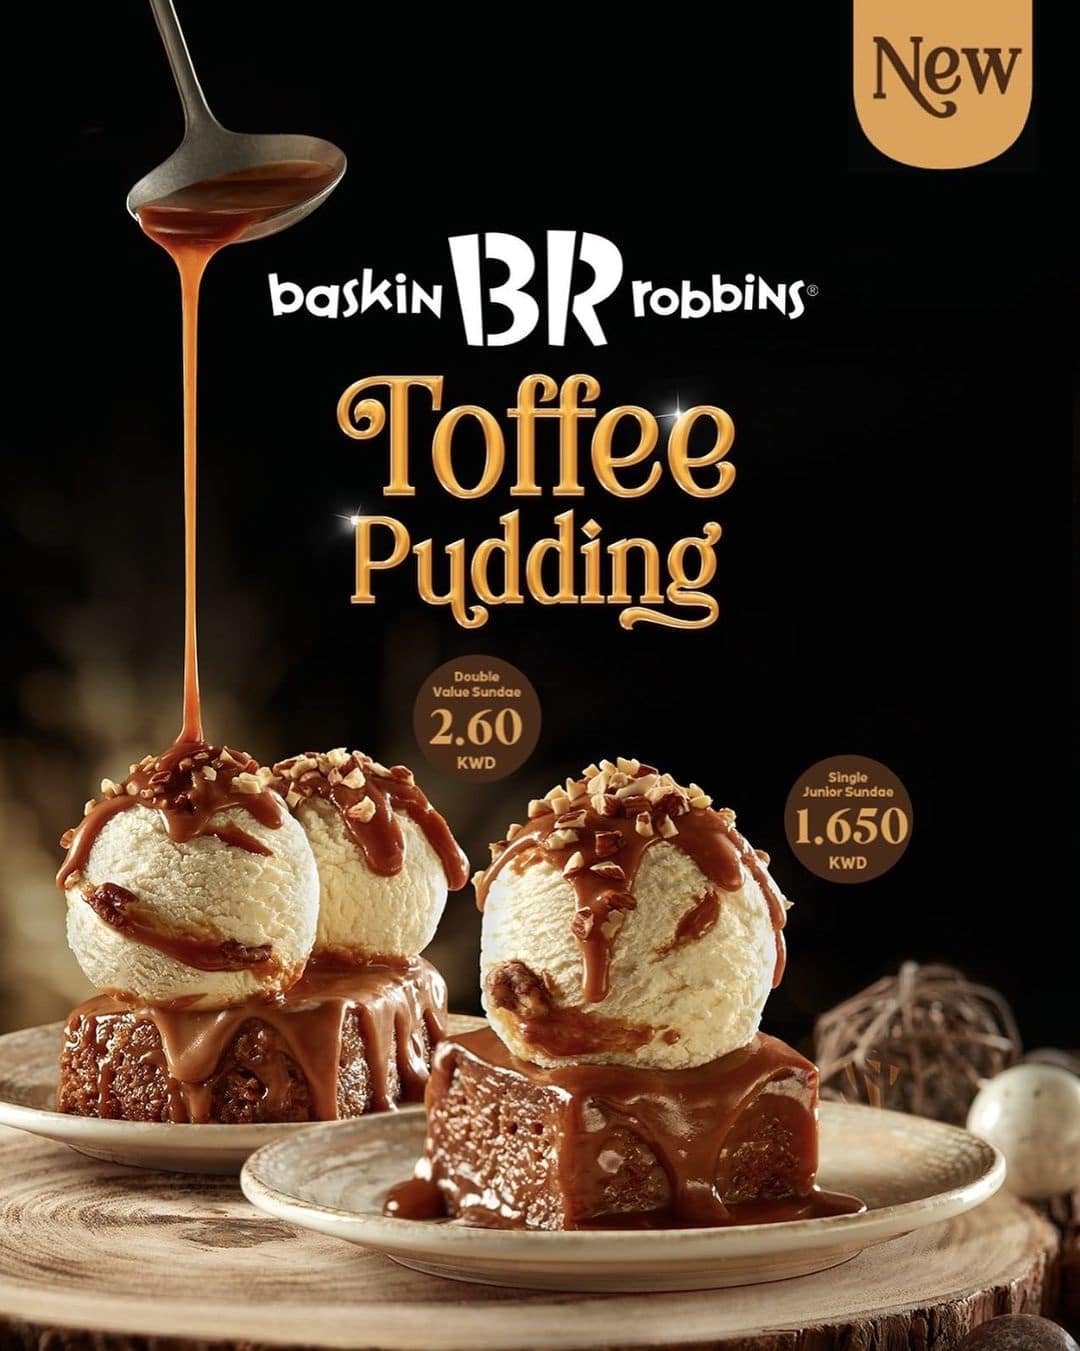 Baskin Robbins Toffee Pudding offer